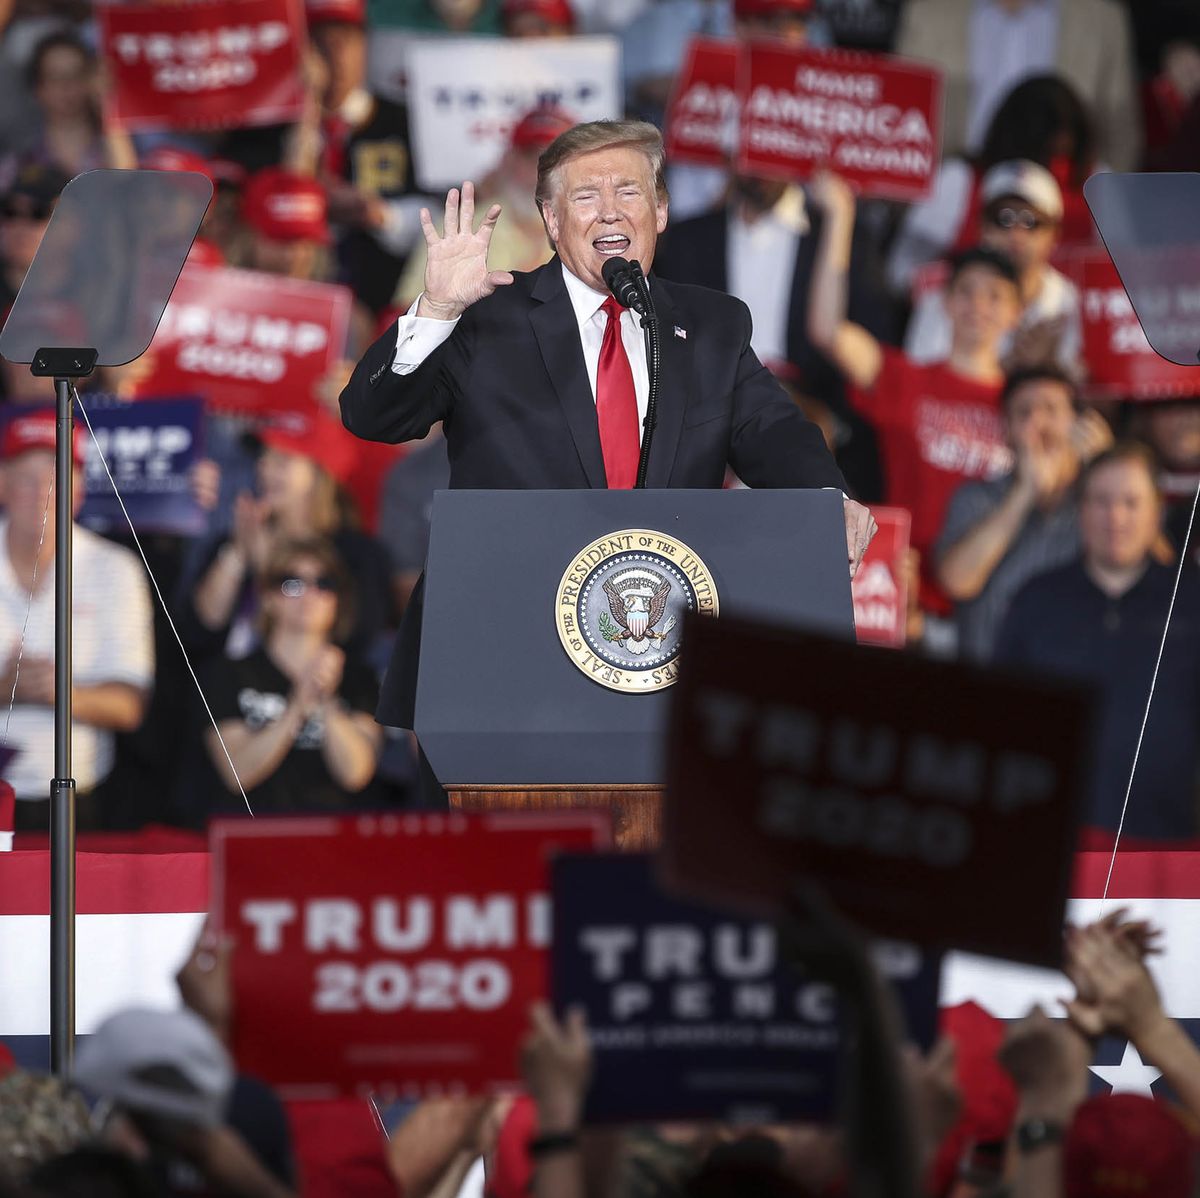 montoursville, pa   may 20 us president donald trump speaks during a 'make america great again' campaign rally at williamsport regional airport, may 20, 2019 in montoursville, pennsylvania trump is making a trip to the swing state to drum up republican support on the eve of a special election in pennsylvania's 12th congressional district, with republican fred keller facing off against democrat marc friedenberg photo by drew angerergetty images